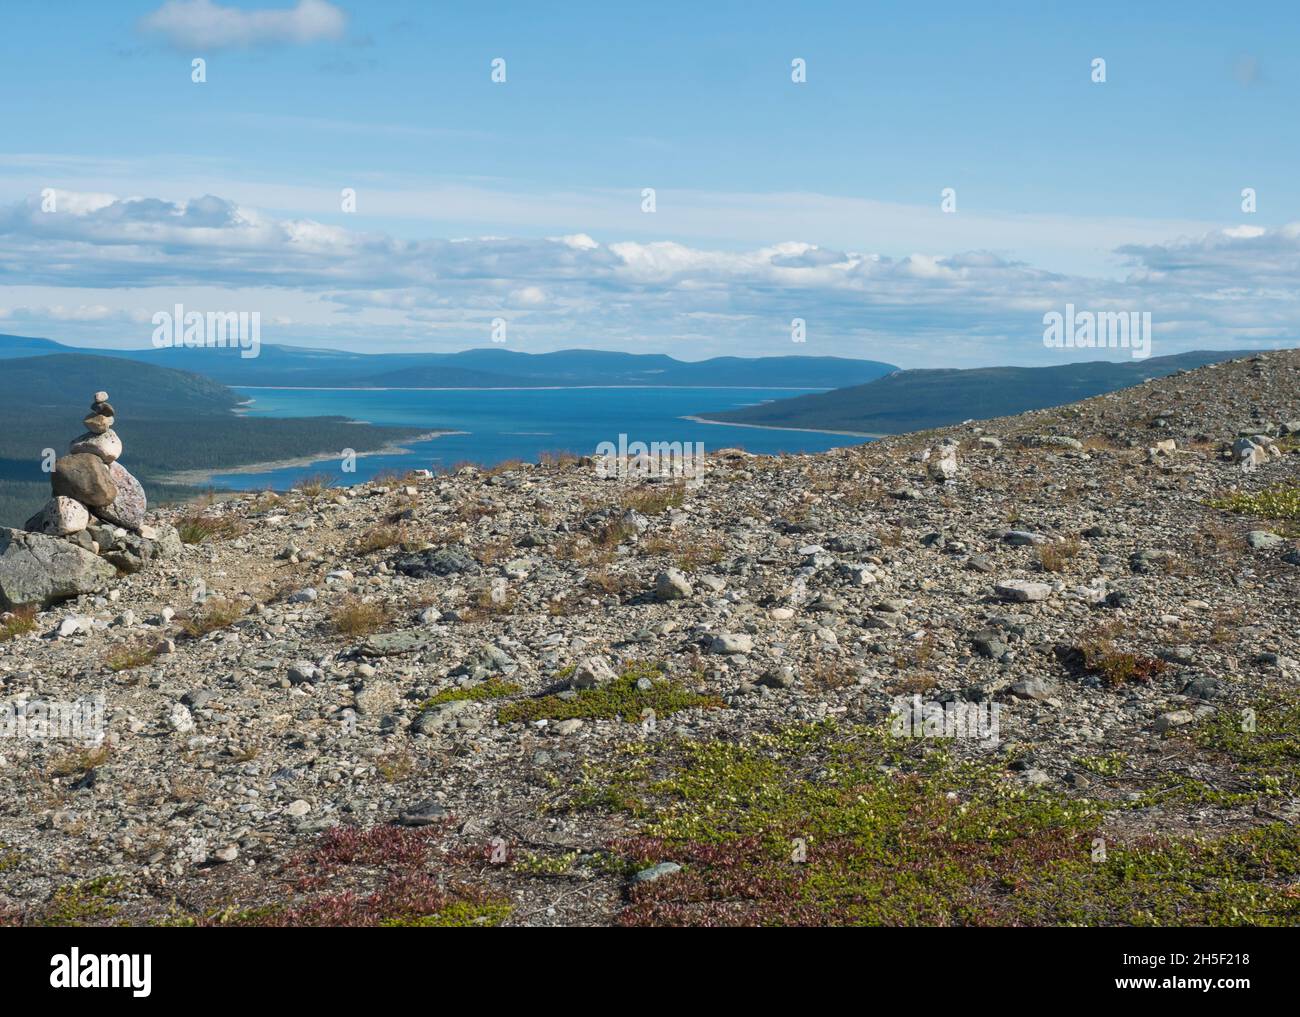 View on Tjaktjajaure lake, valley from Kungsleden hiking trail in Sarek national park, Sweden Lapland. Nordic wild landscape with mountains, hill Stock Photo